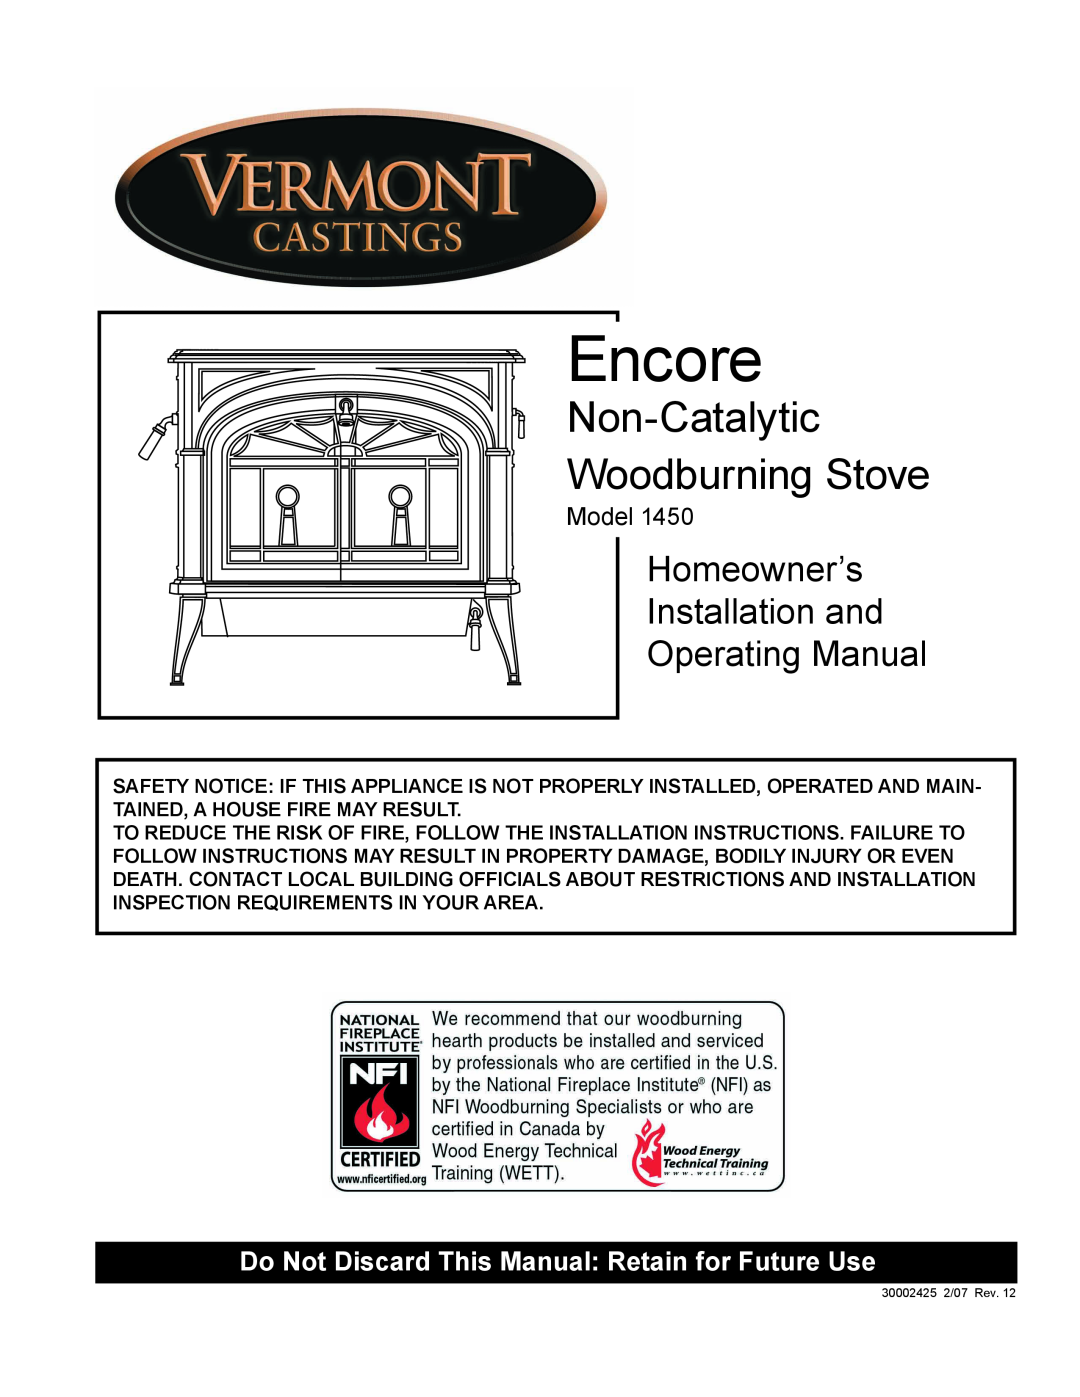 Vermont Casting 1450 installation instructions Encore, Non-Catalytic Woodburning Stove, Model 